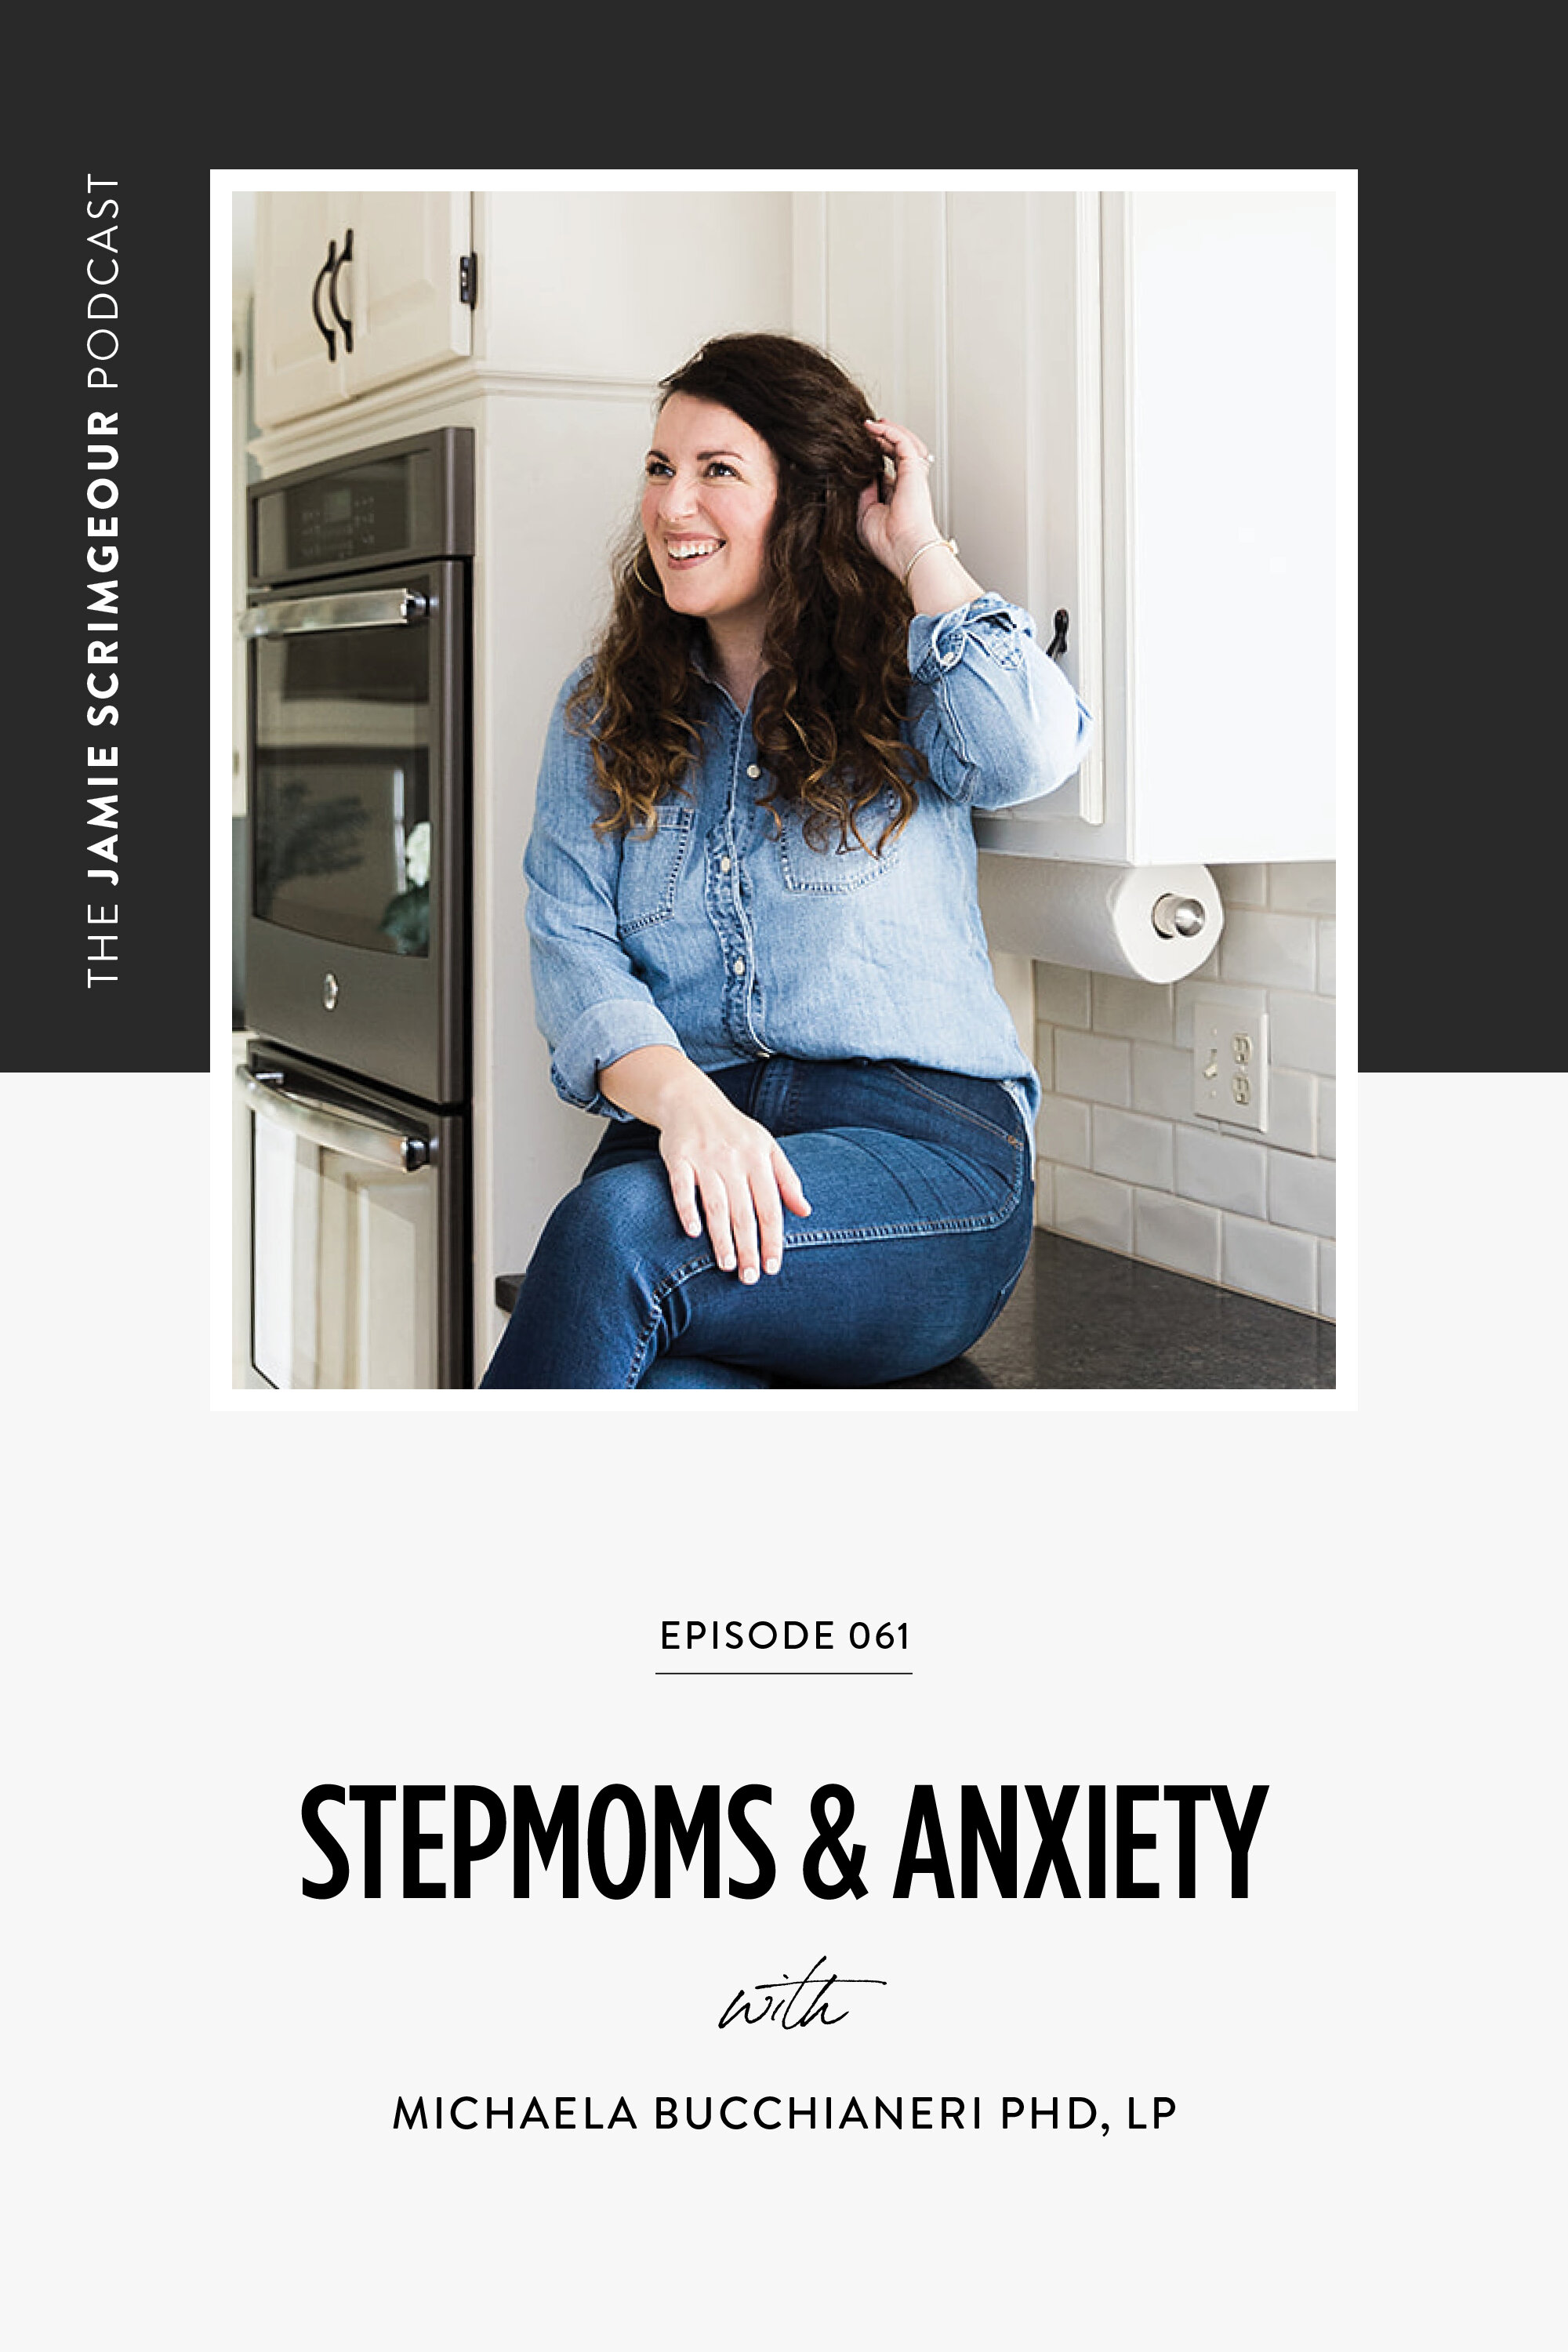 The Jamie Scrimgeour Podcast Episode 061 - Stepmoms And Anxiety with Michaela Bucchianeri